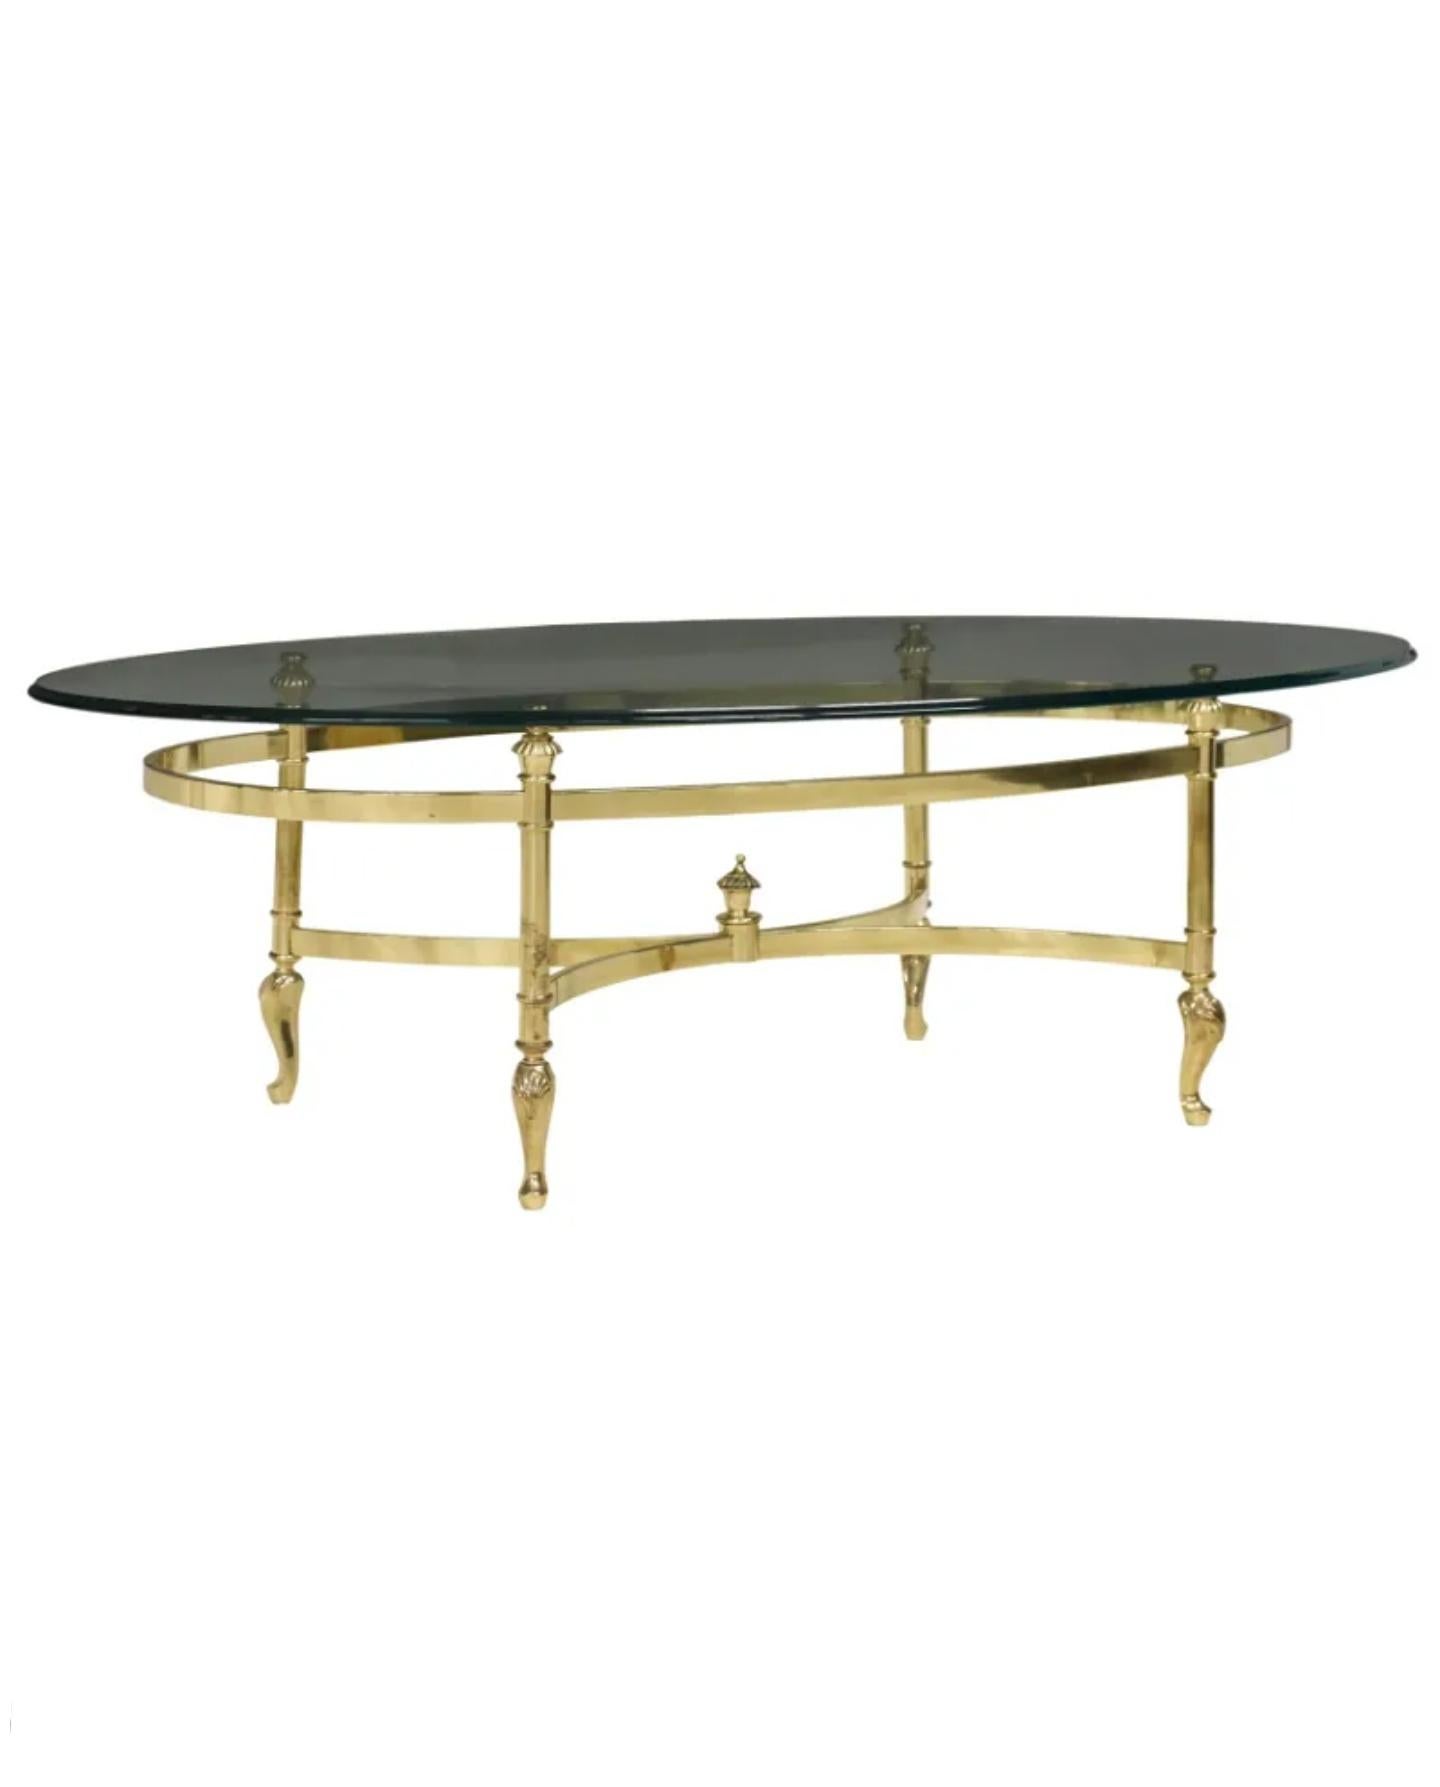 A fine quality Hollywood Regency style brass and glass oval coffee table, attributed to La Barge, second half of the 20th century, having beveled glass top, rising on finial topped X-form cross-stretcher base, ending on shell accented cabriole legs.